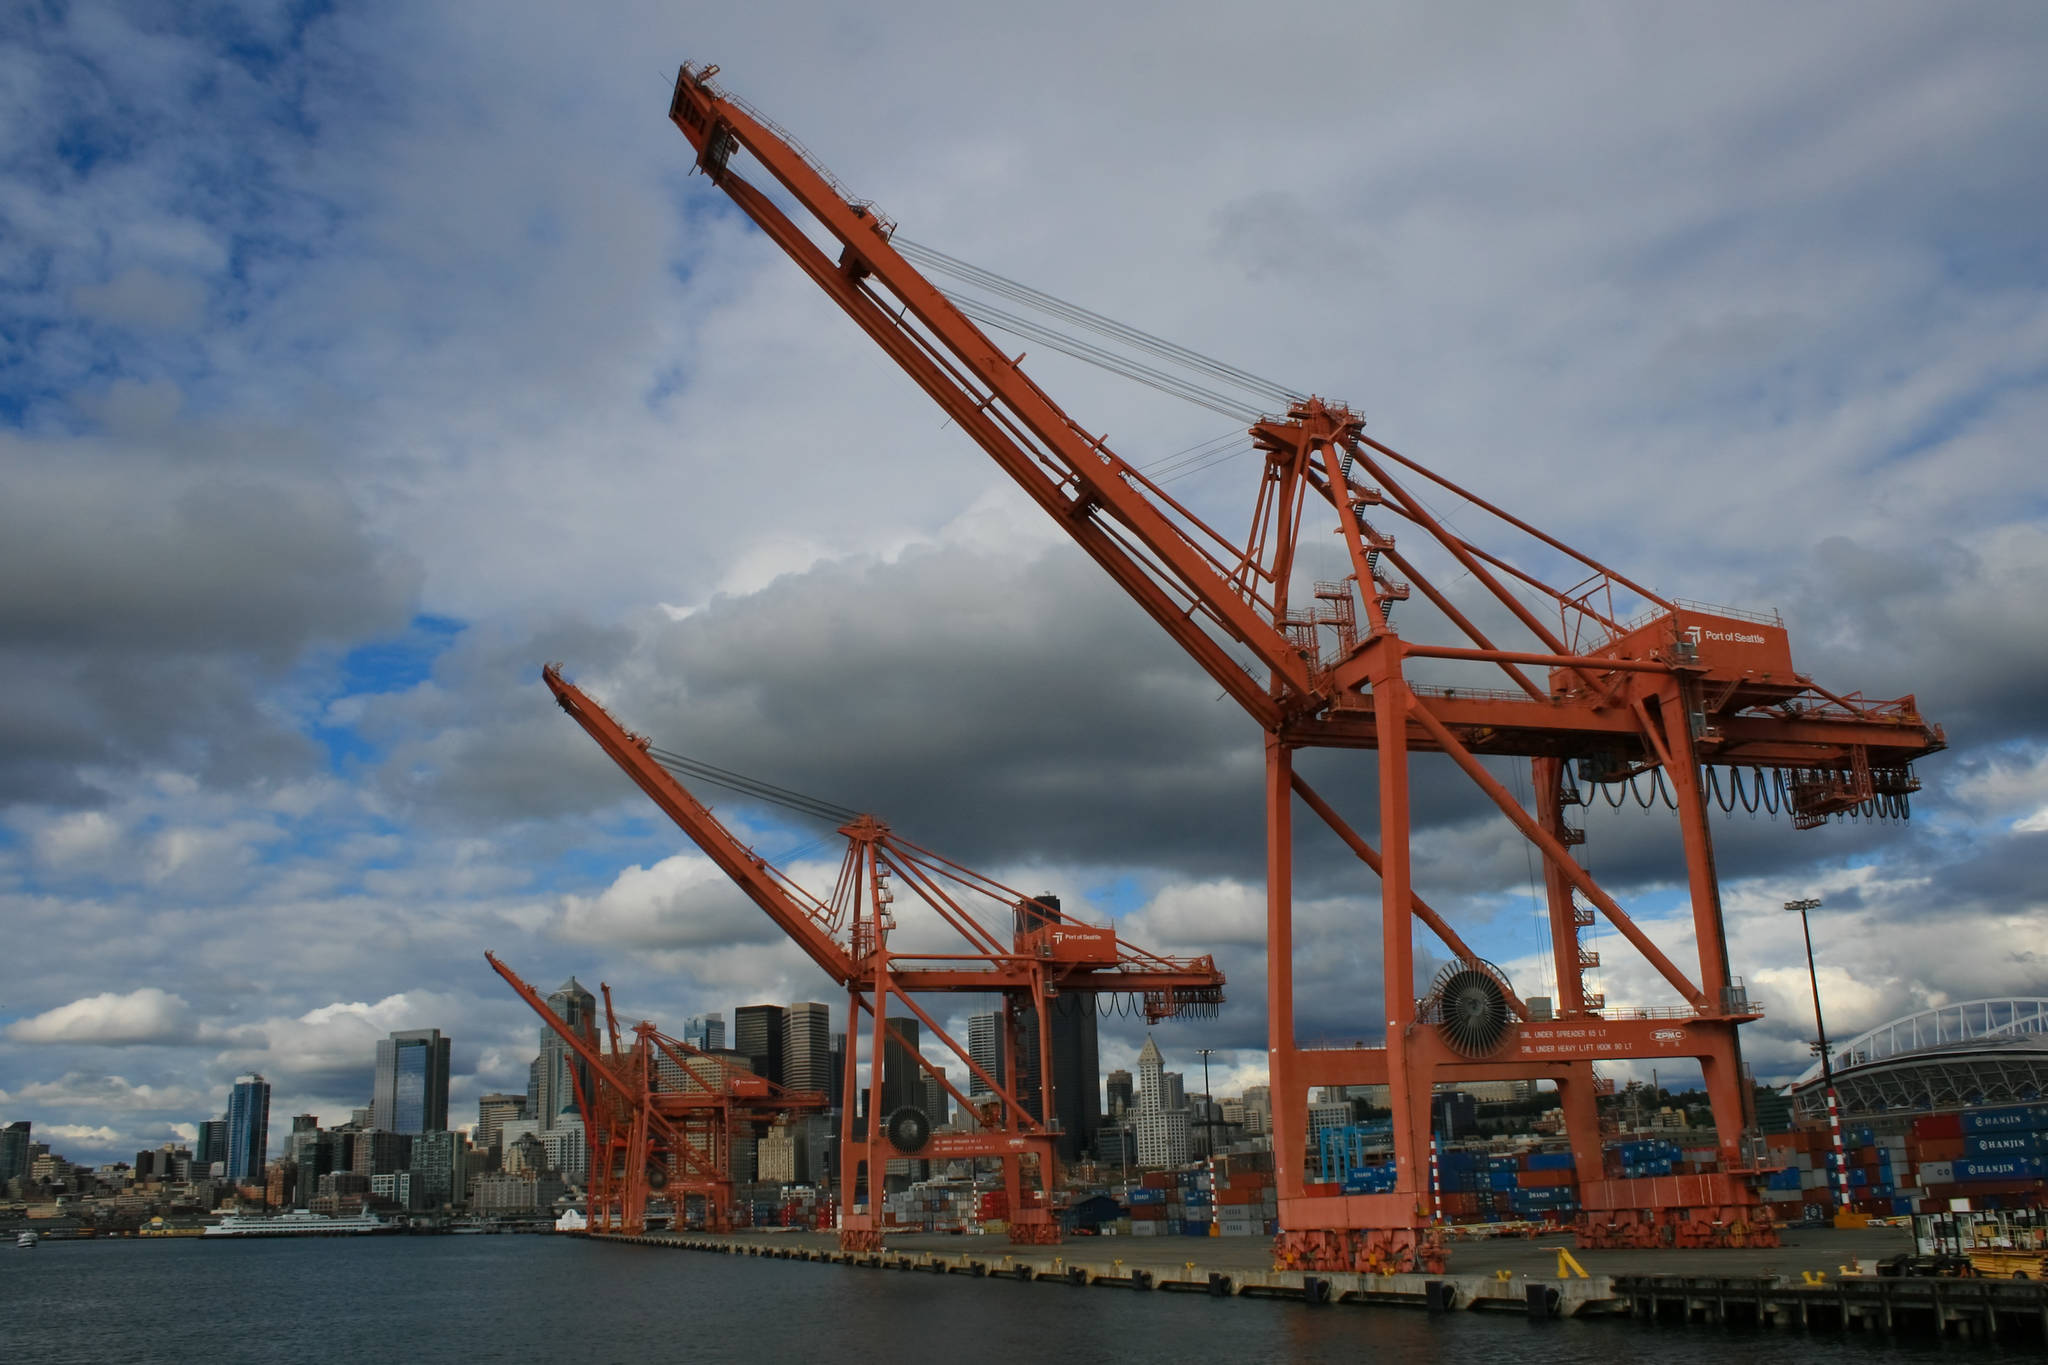 Cargo transportation was among the various regional industries driving wage and employment growth in King County. Photo via PxHere